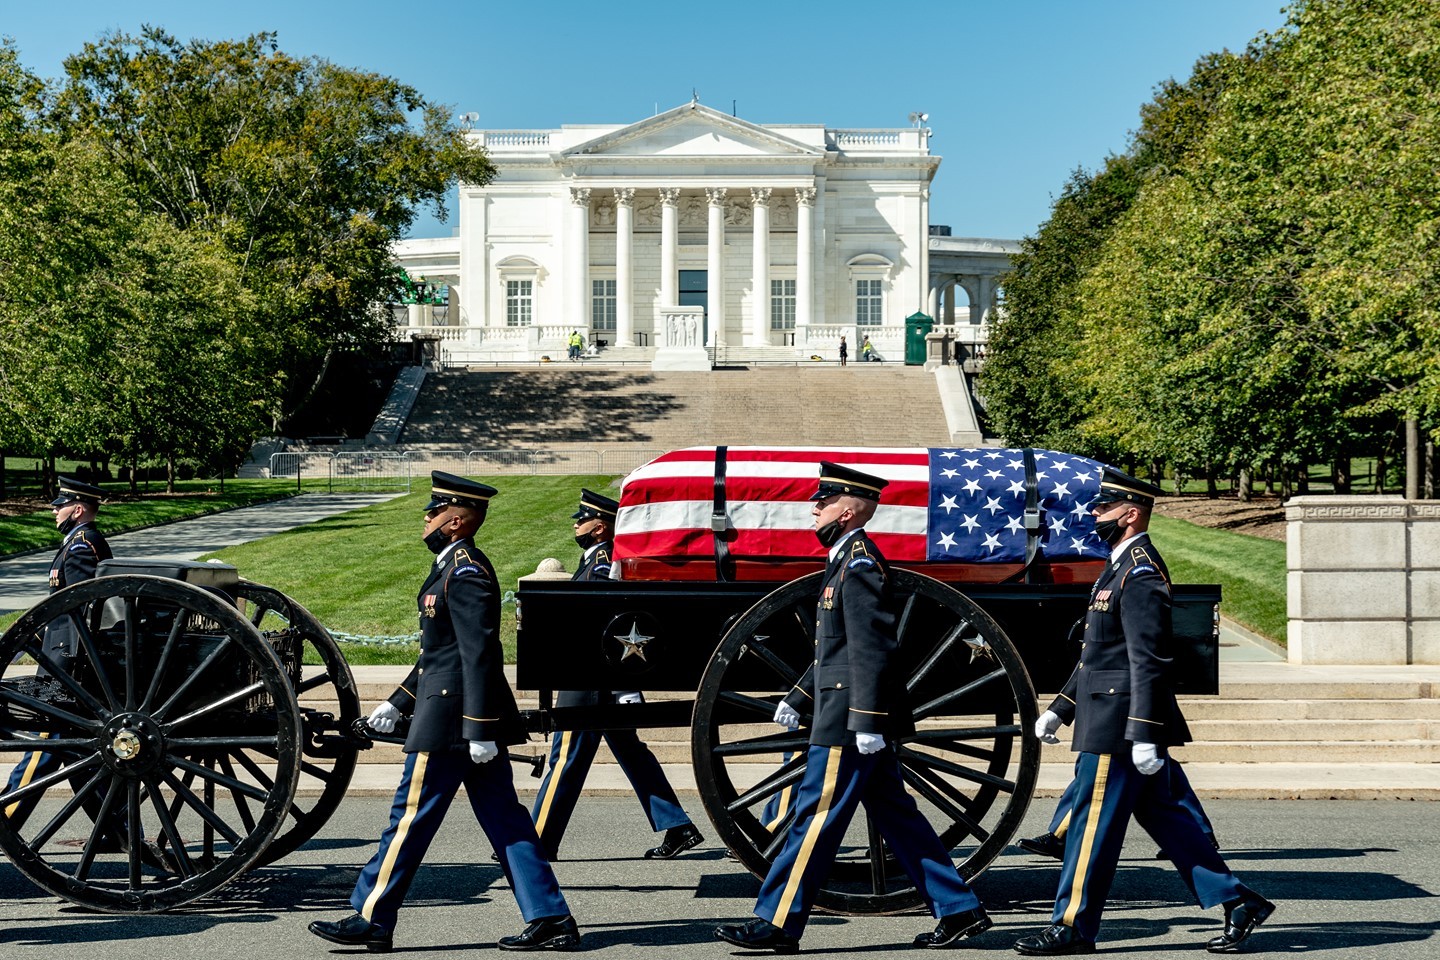 A full honors funeral service passes in front of the Tomb of the Unknown Soldier at Arlington National Cemetery on its way to a gravesite.

In March 1926, soldiers from nearby Fort Myer were first assigned to guard the Tomb of the Unknown Soldier. The guards, present only during daylight hours, discouraged visitors from climbing or stepping on the Tomb. In 1937, the guards became a 24/7 presence, standing watch over the Unknown Soldier at all times.

The 3rd U.S. Infantry Regiment, known as “The Old Guard,” was designated as the Army’s official ceremonial unit on April 6, 1948. At that time, The Old Guard began guarding the Tomb of the Unknown Soldier. Soldiers of The Old Guard also serve as escorts to the president and conduct military ceremonies in and around Washington, D.C., including military funeral escorts at Arlington National Cemetery.

Soldiers who volunteer to become Tomb Guards must undergo a strict selection process and intensive training. Each element of the Tomb Guard’s routine has meaning. The Guard marches 21 steps down the black mat behind the Tomb, turns and faces east for 21 seconds, turns and faces north for 21 seconds, and then takes 21 steps down the mat. Next, the Guard executes a sharp "shoulder-arms" movement to place his/her weapon on the shoulder closest to the visitors, signifying that he or she stands between the Tomb and any possible threat. The number 21 symbolizes the highest symbolic military honor that can be bestowed: the 21-gun salute.